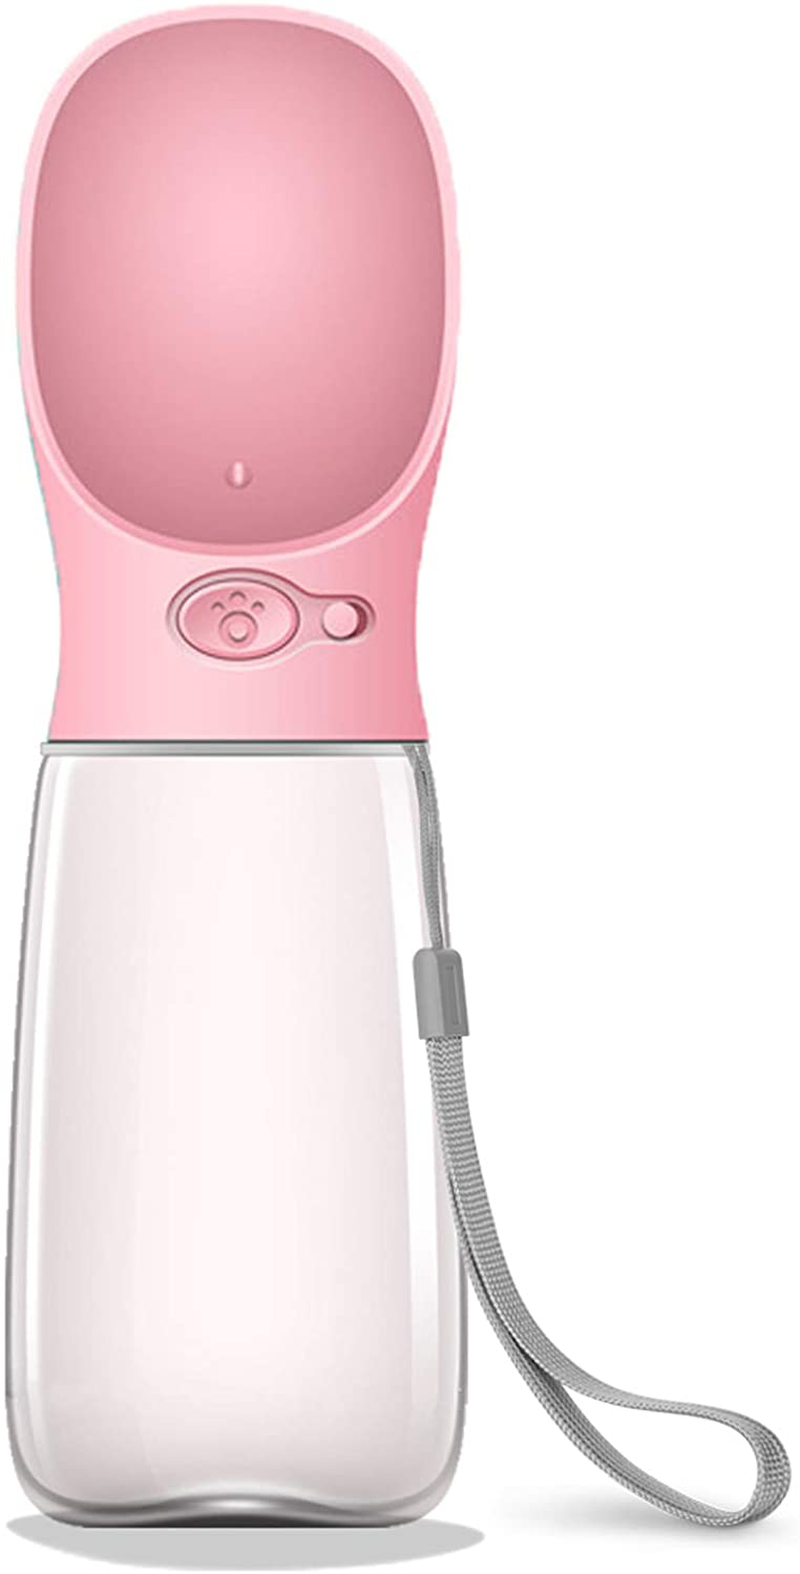 Malsipree Dog Water Bottle, Leak Proof Portable Puppy Water Dispenser with Drinking Feeder for Pets Outdoor Walking, Hiking, Travel, Food Grade Plastic Animals & Pet Supplies > Pet Supplies > Dog Supplies > Dog Treadmills MalsiPree 19oz Pink  